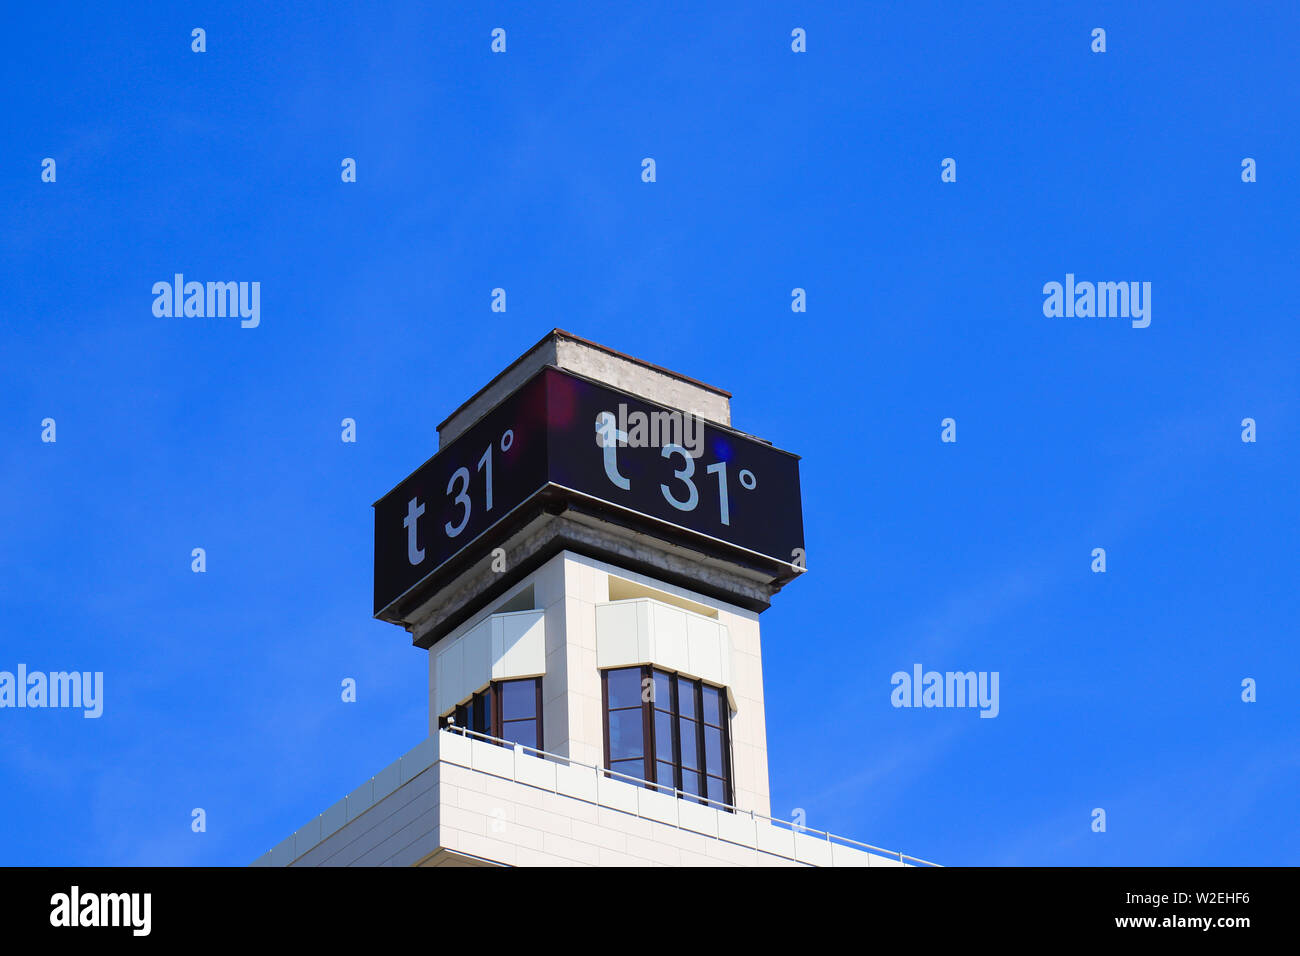 Electronic large thermometer on the building, indicating a high summer air temperature 31 degrees Celsius. Summer hot weather, heat Stock Photo